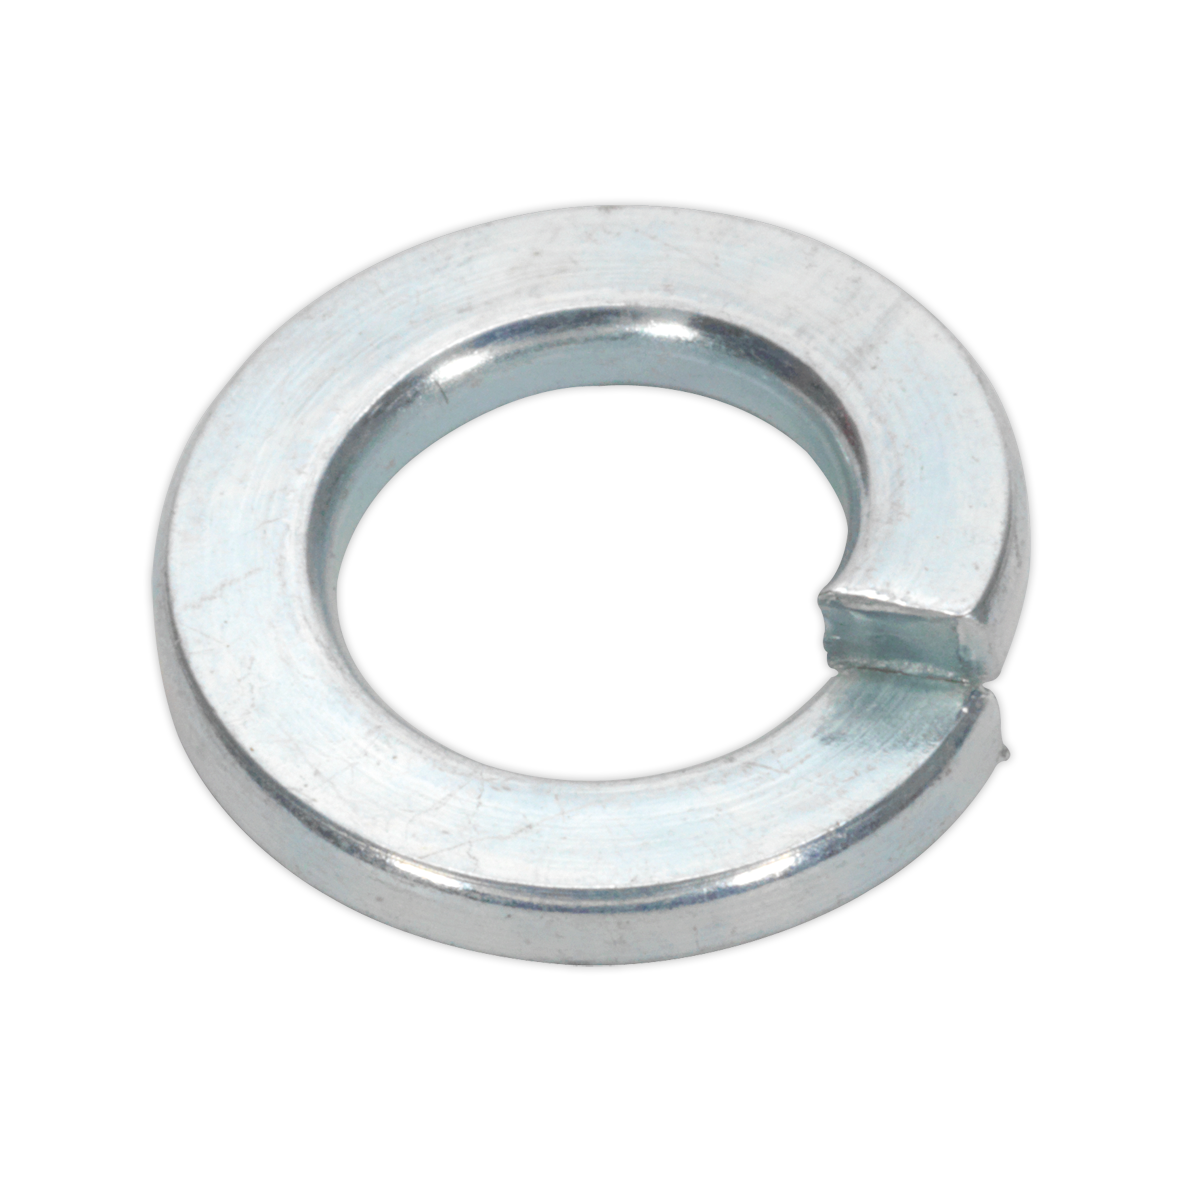 Spring Washer DIN 127B M8 Zinc Pack of 100 - SWM8 - Farming Parts